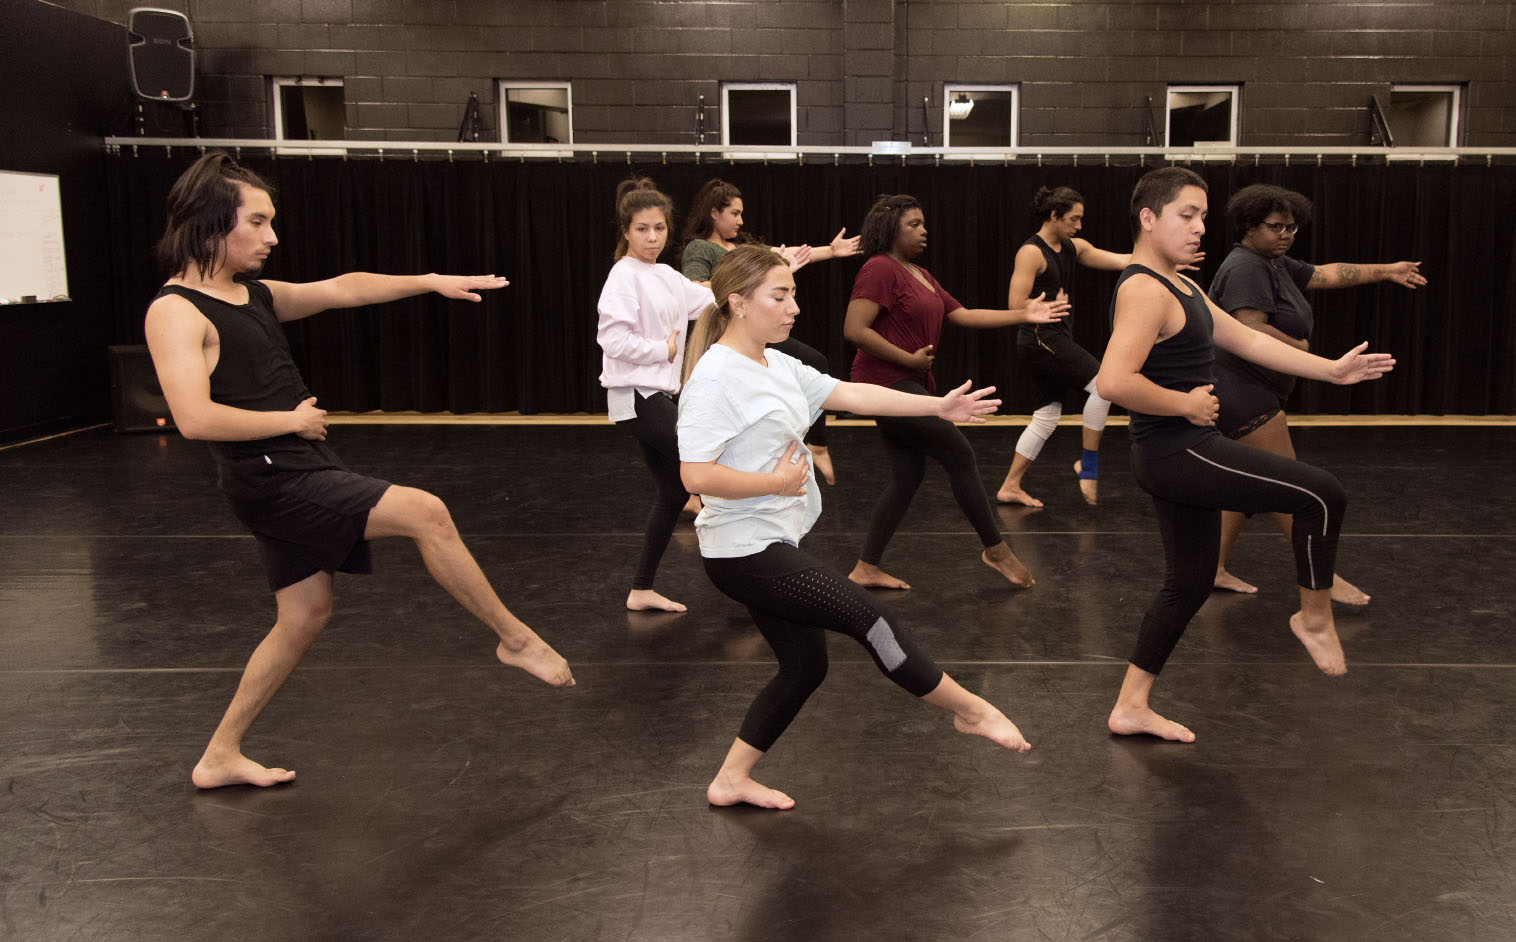 Members of SE’s Fusion Dance Company rehearse for the Dec. 8 Dance Works concert. For many students, this concert is the first time they will perform onstage.